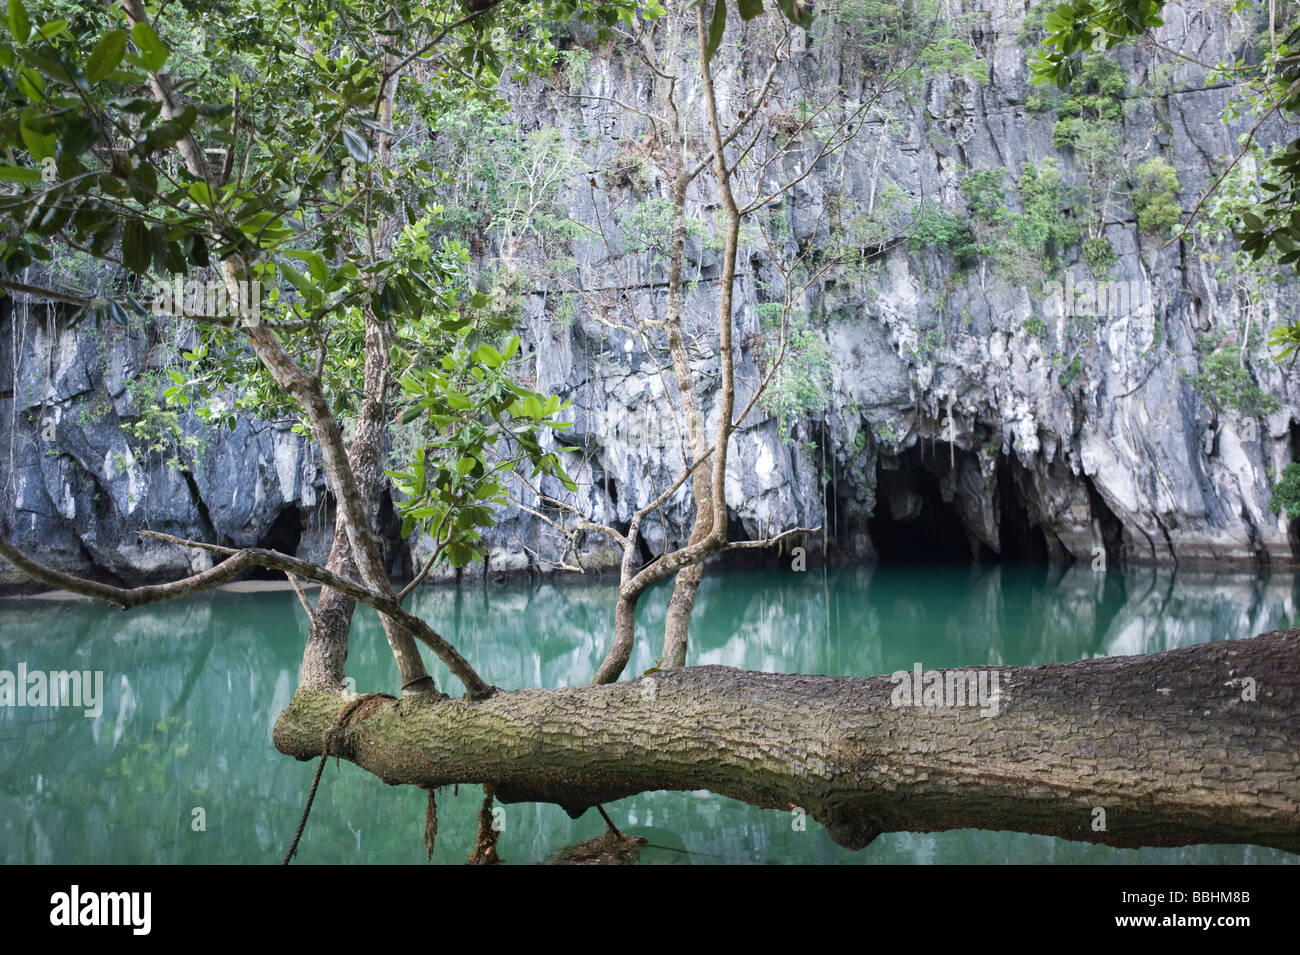 Entrance to the Puerto Princesa Subterranean River National Park on Palawan Philippines Stock Photo